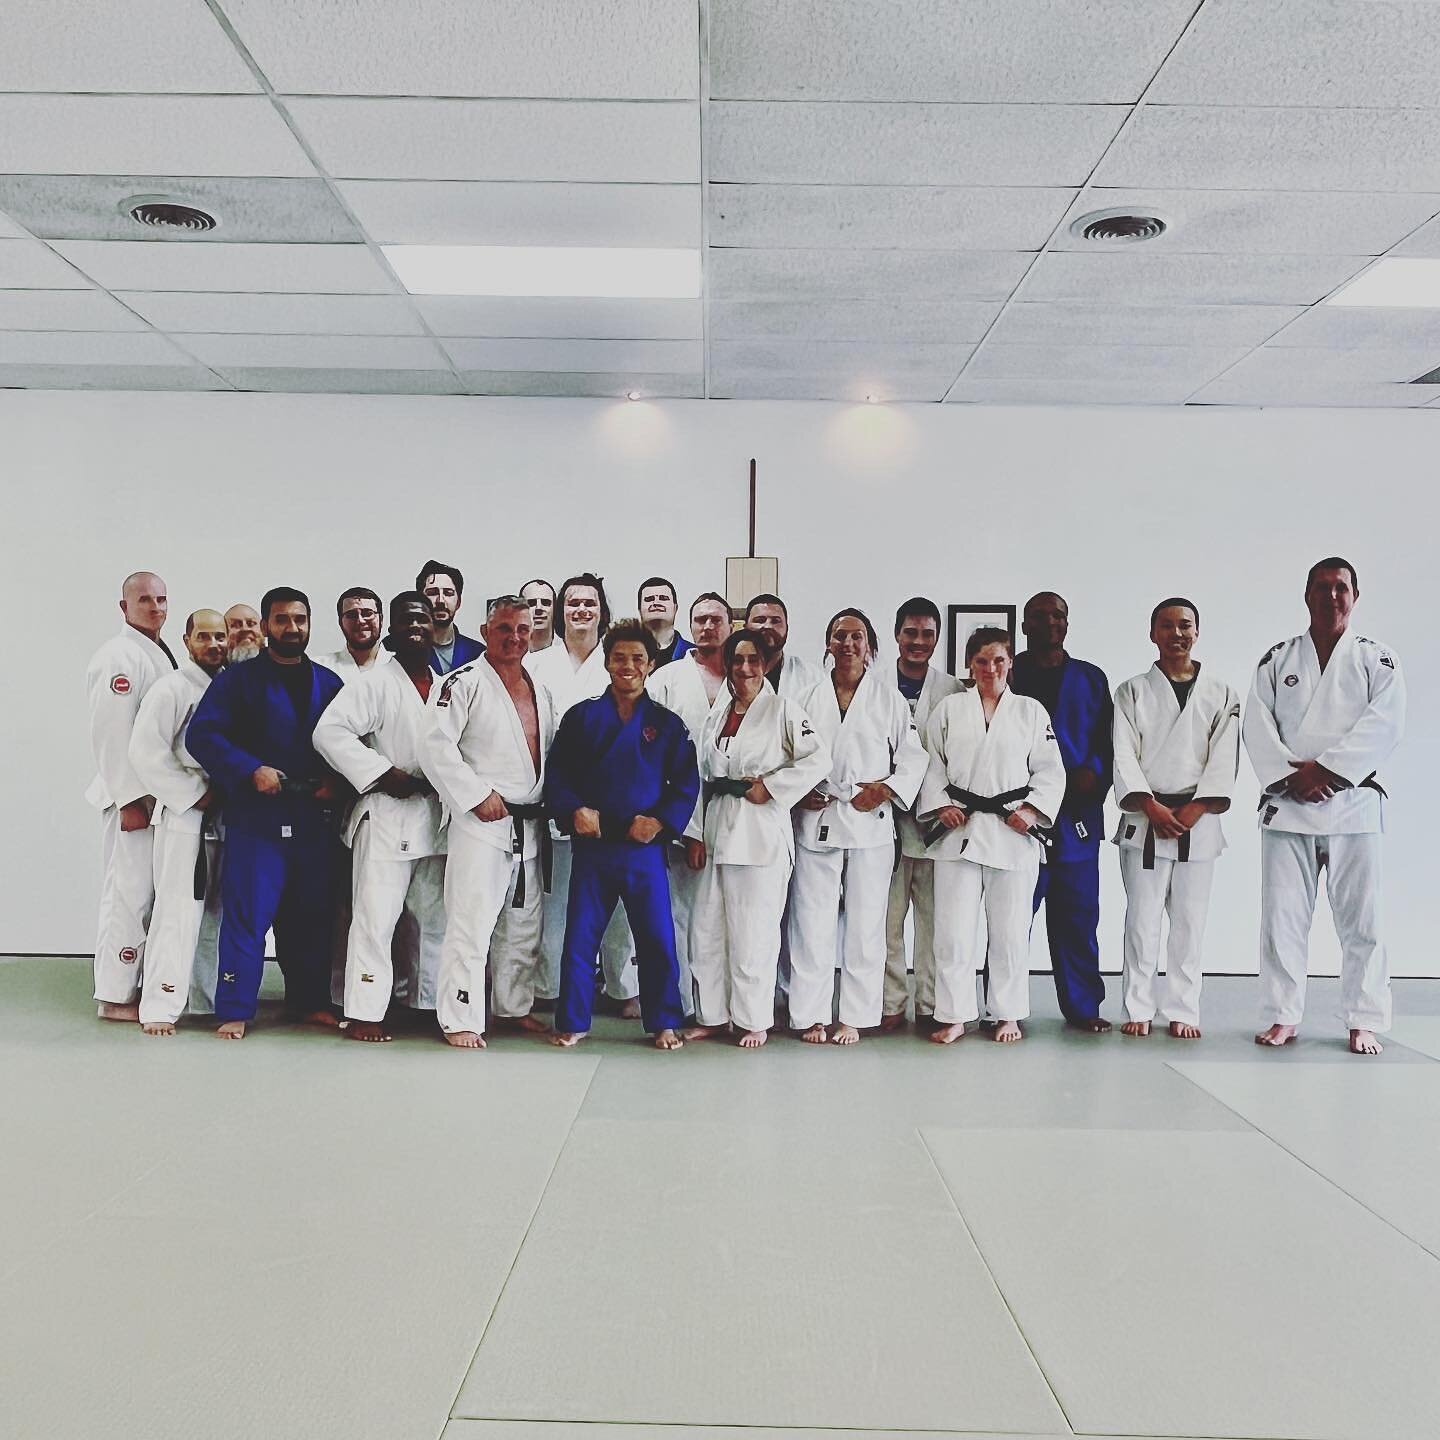 I had my seminar at Greater Detroit Budojuku in Michigan on last Sat, and Sun.  I really enjoyed sharing my Judo with the people in the picture. I deeply appreciate your hospitality. See you guys next year !

#judo #bjj #judoseminar